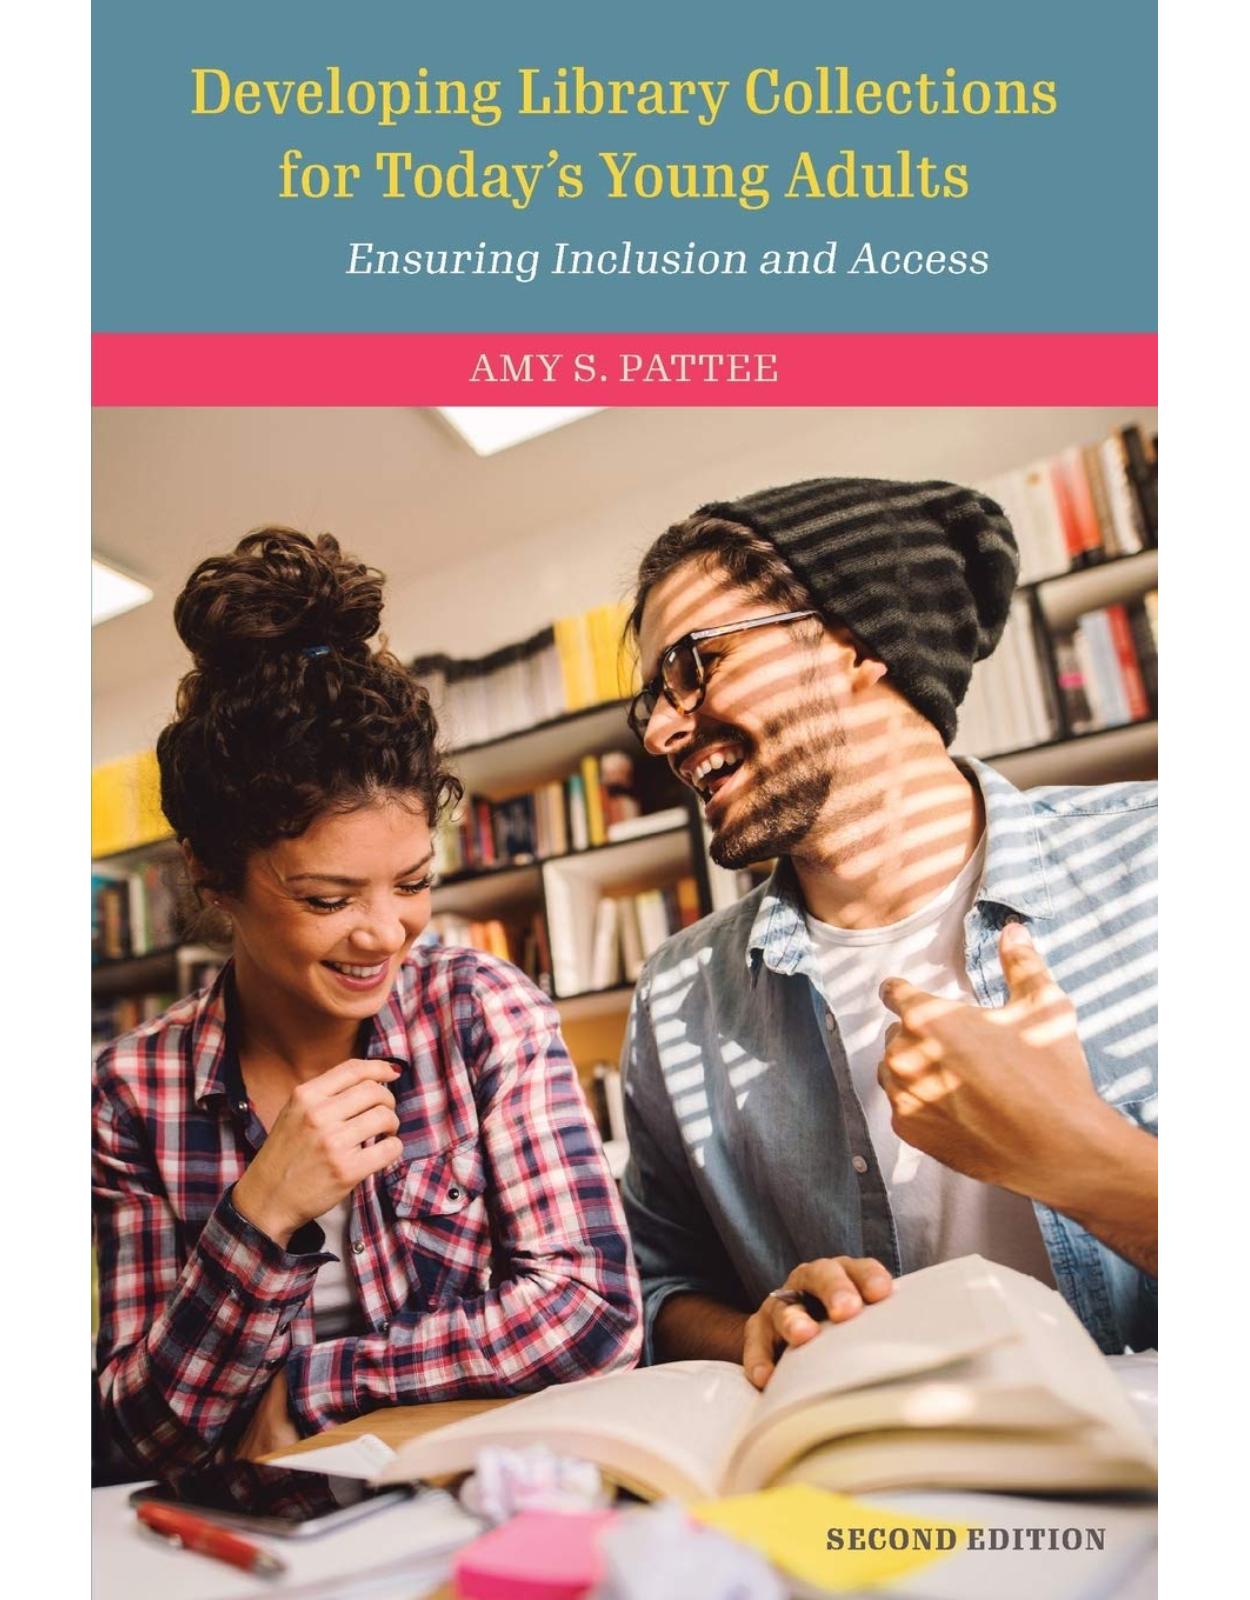 Developing Library Collections for Today's Young Adults. Ensuring Inclusion and Access, Second Edition